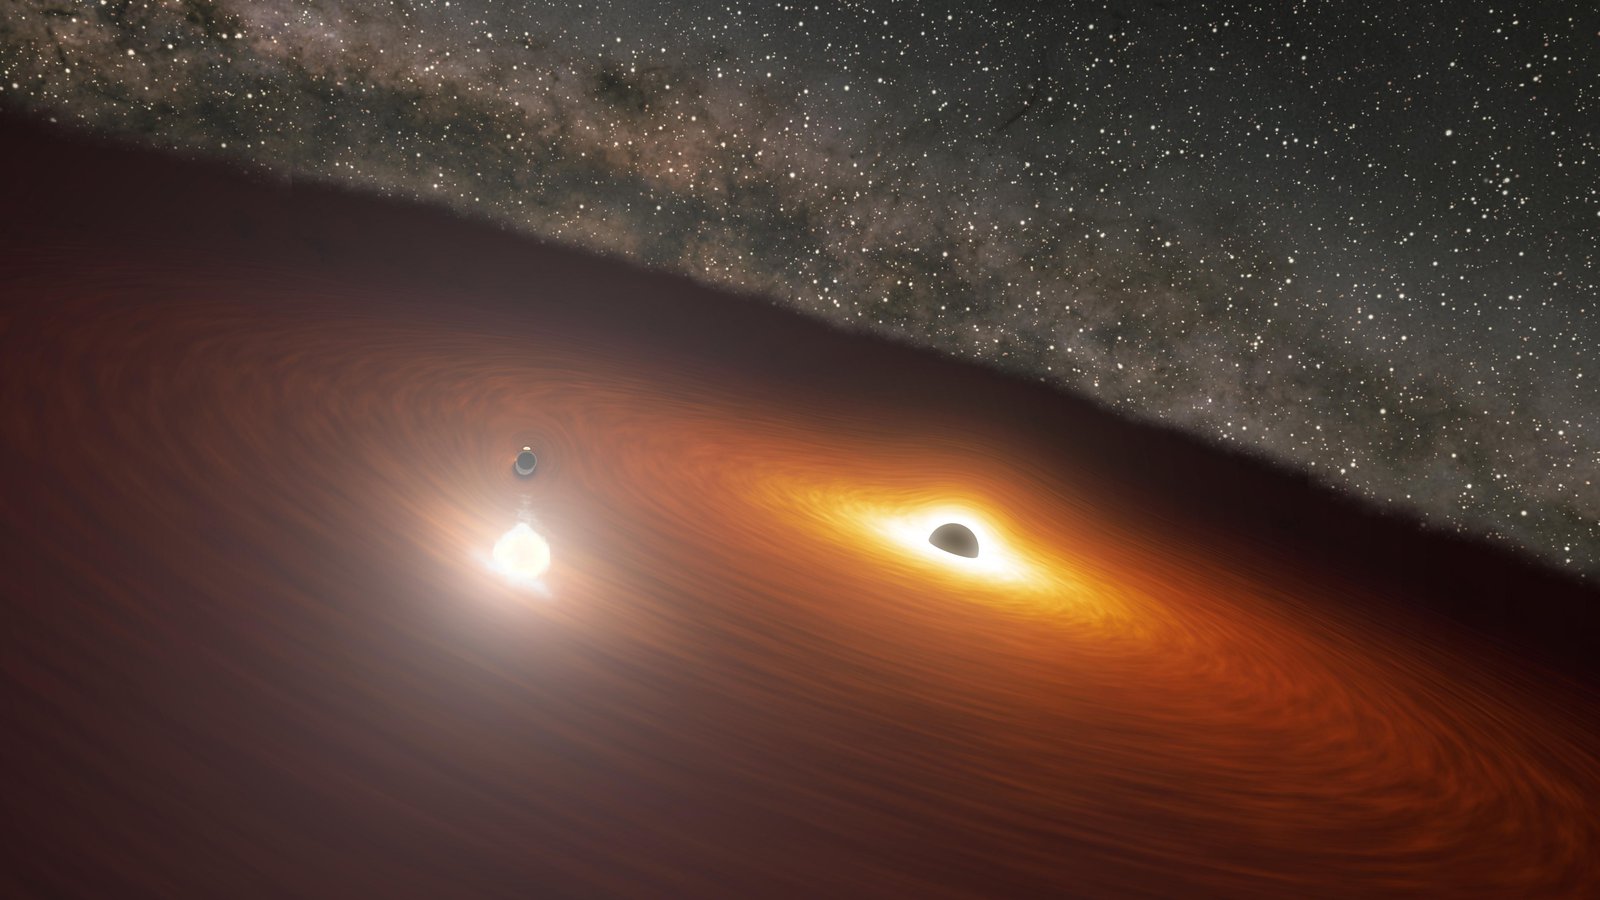 There are two supermassive black holes in the OJ 287 galaxy. Credit: NASA/JPL-Caltech